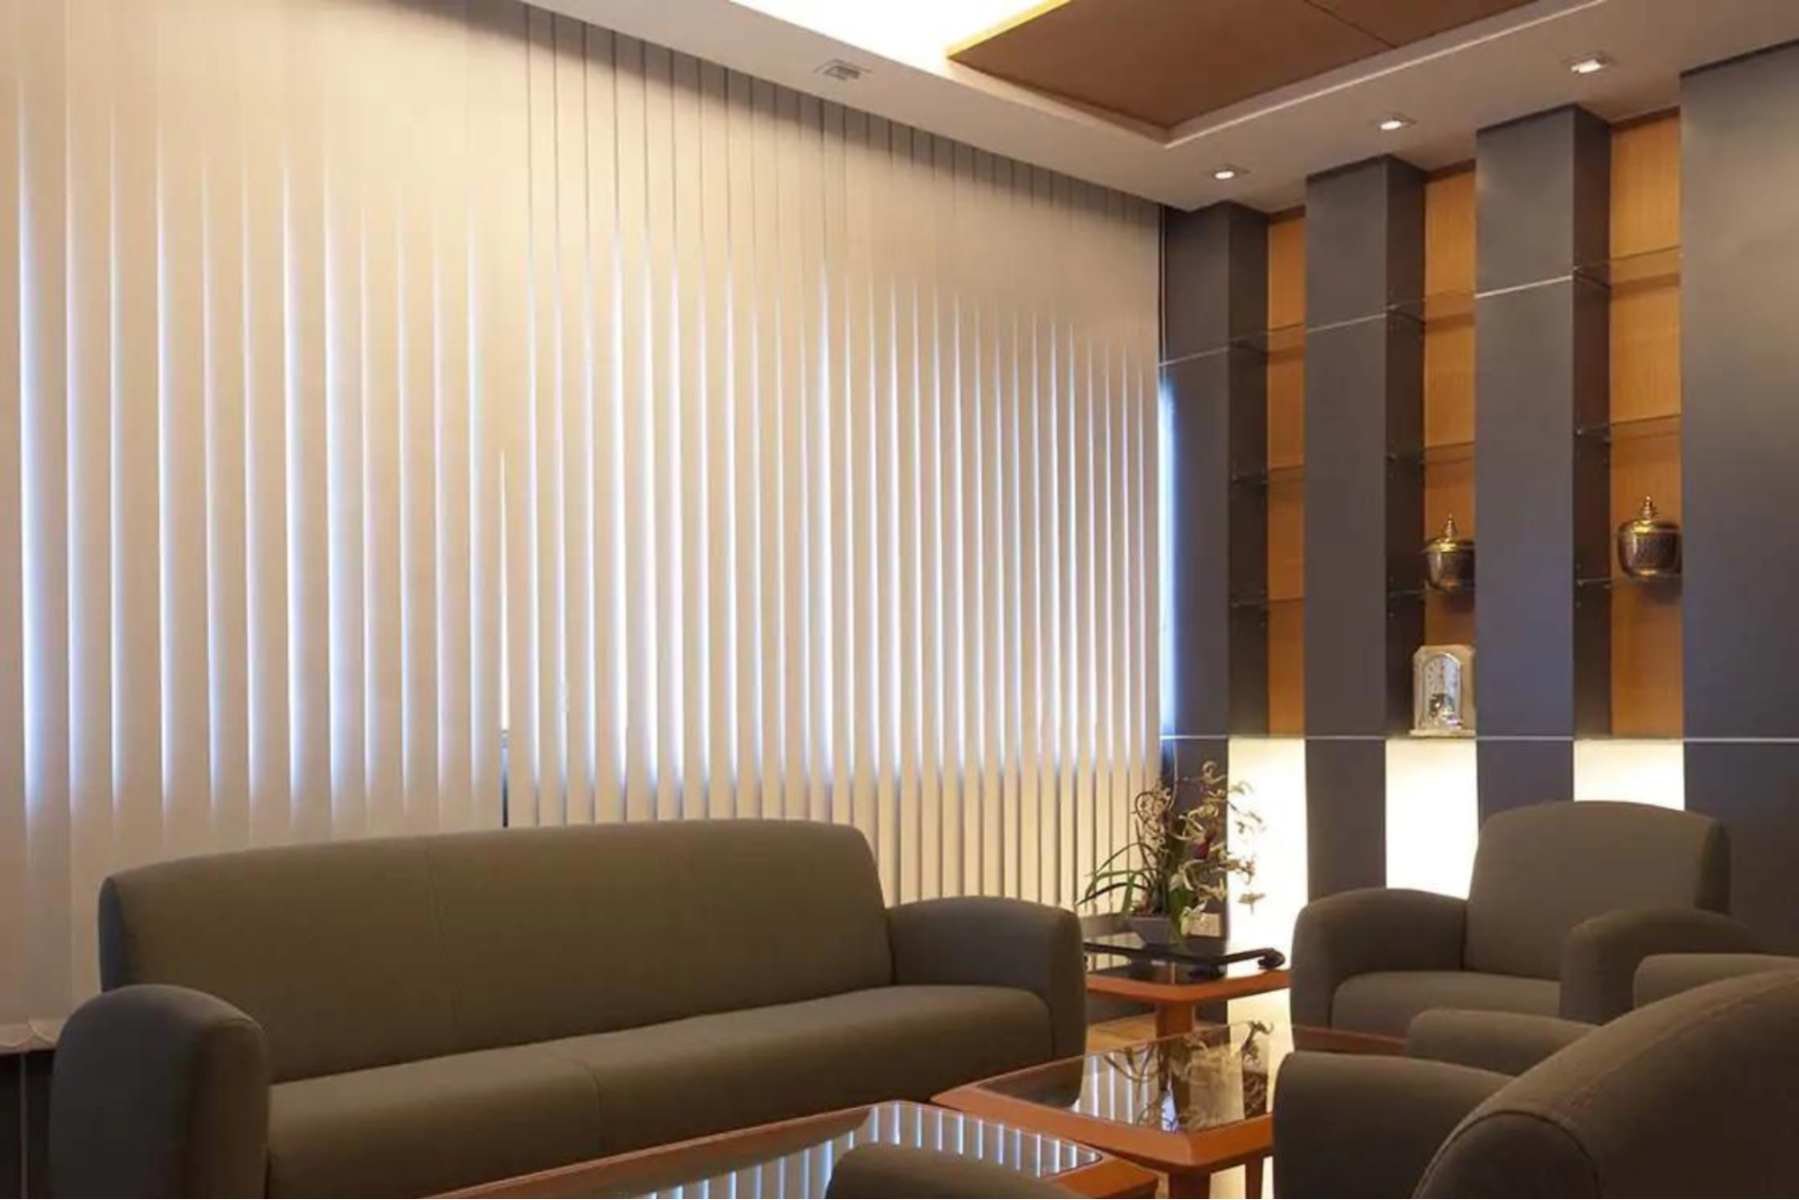 Living area decorated with brown furniture and vertical blinds covering the window behind the sofa